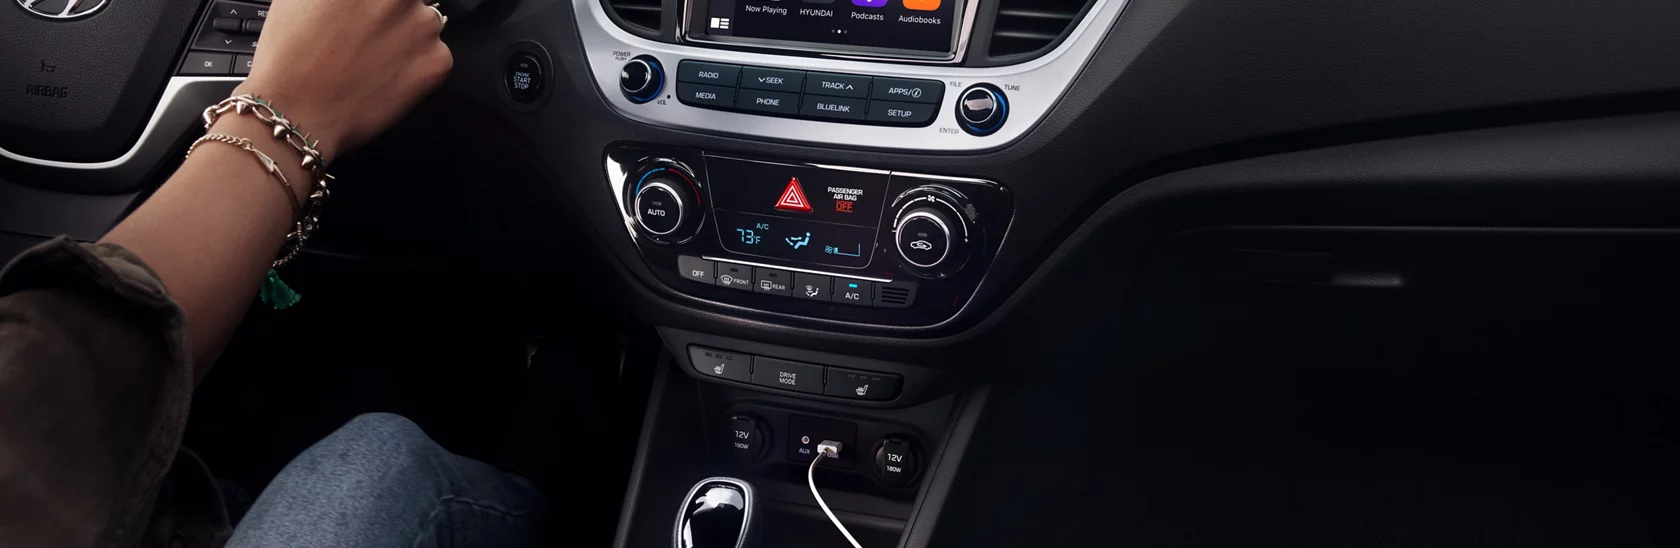 2021 Hyundai Accent Apple CarPlay and Android Auto